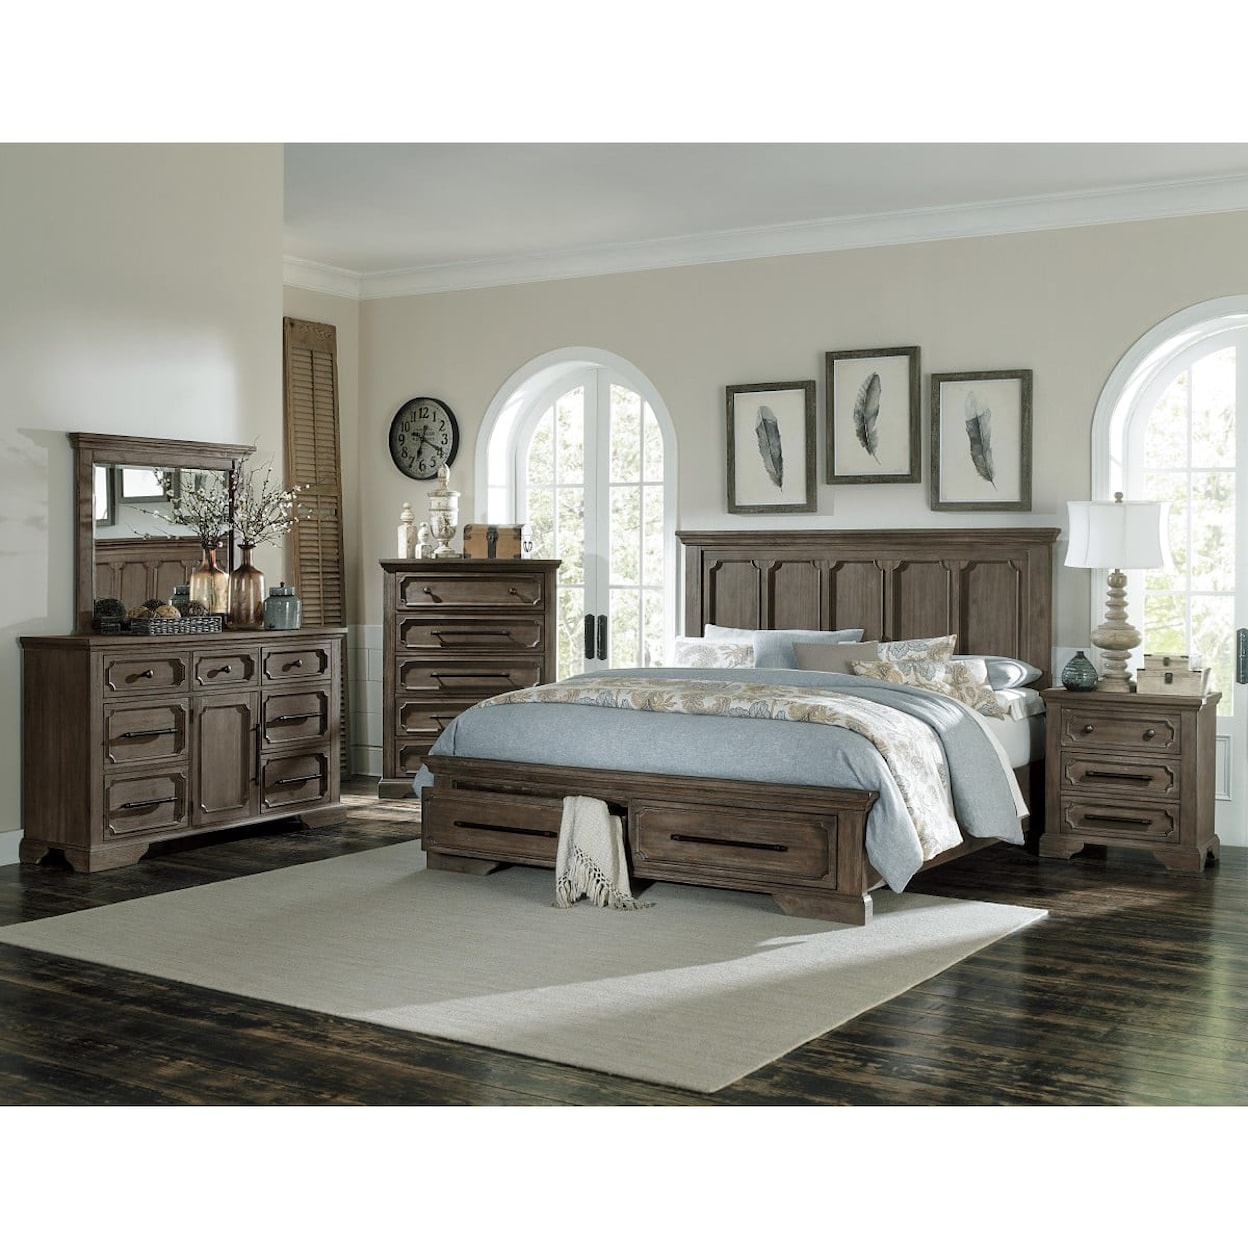 Homelegance Toulon Queen Bed